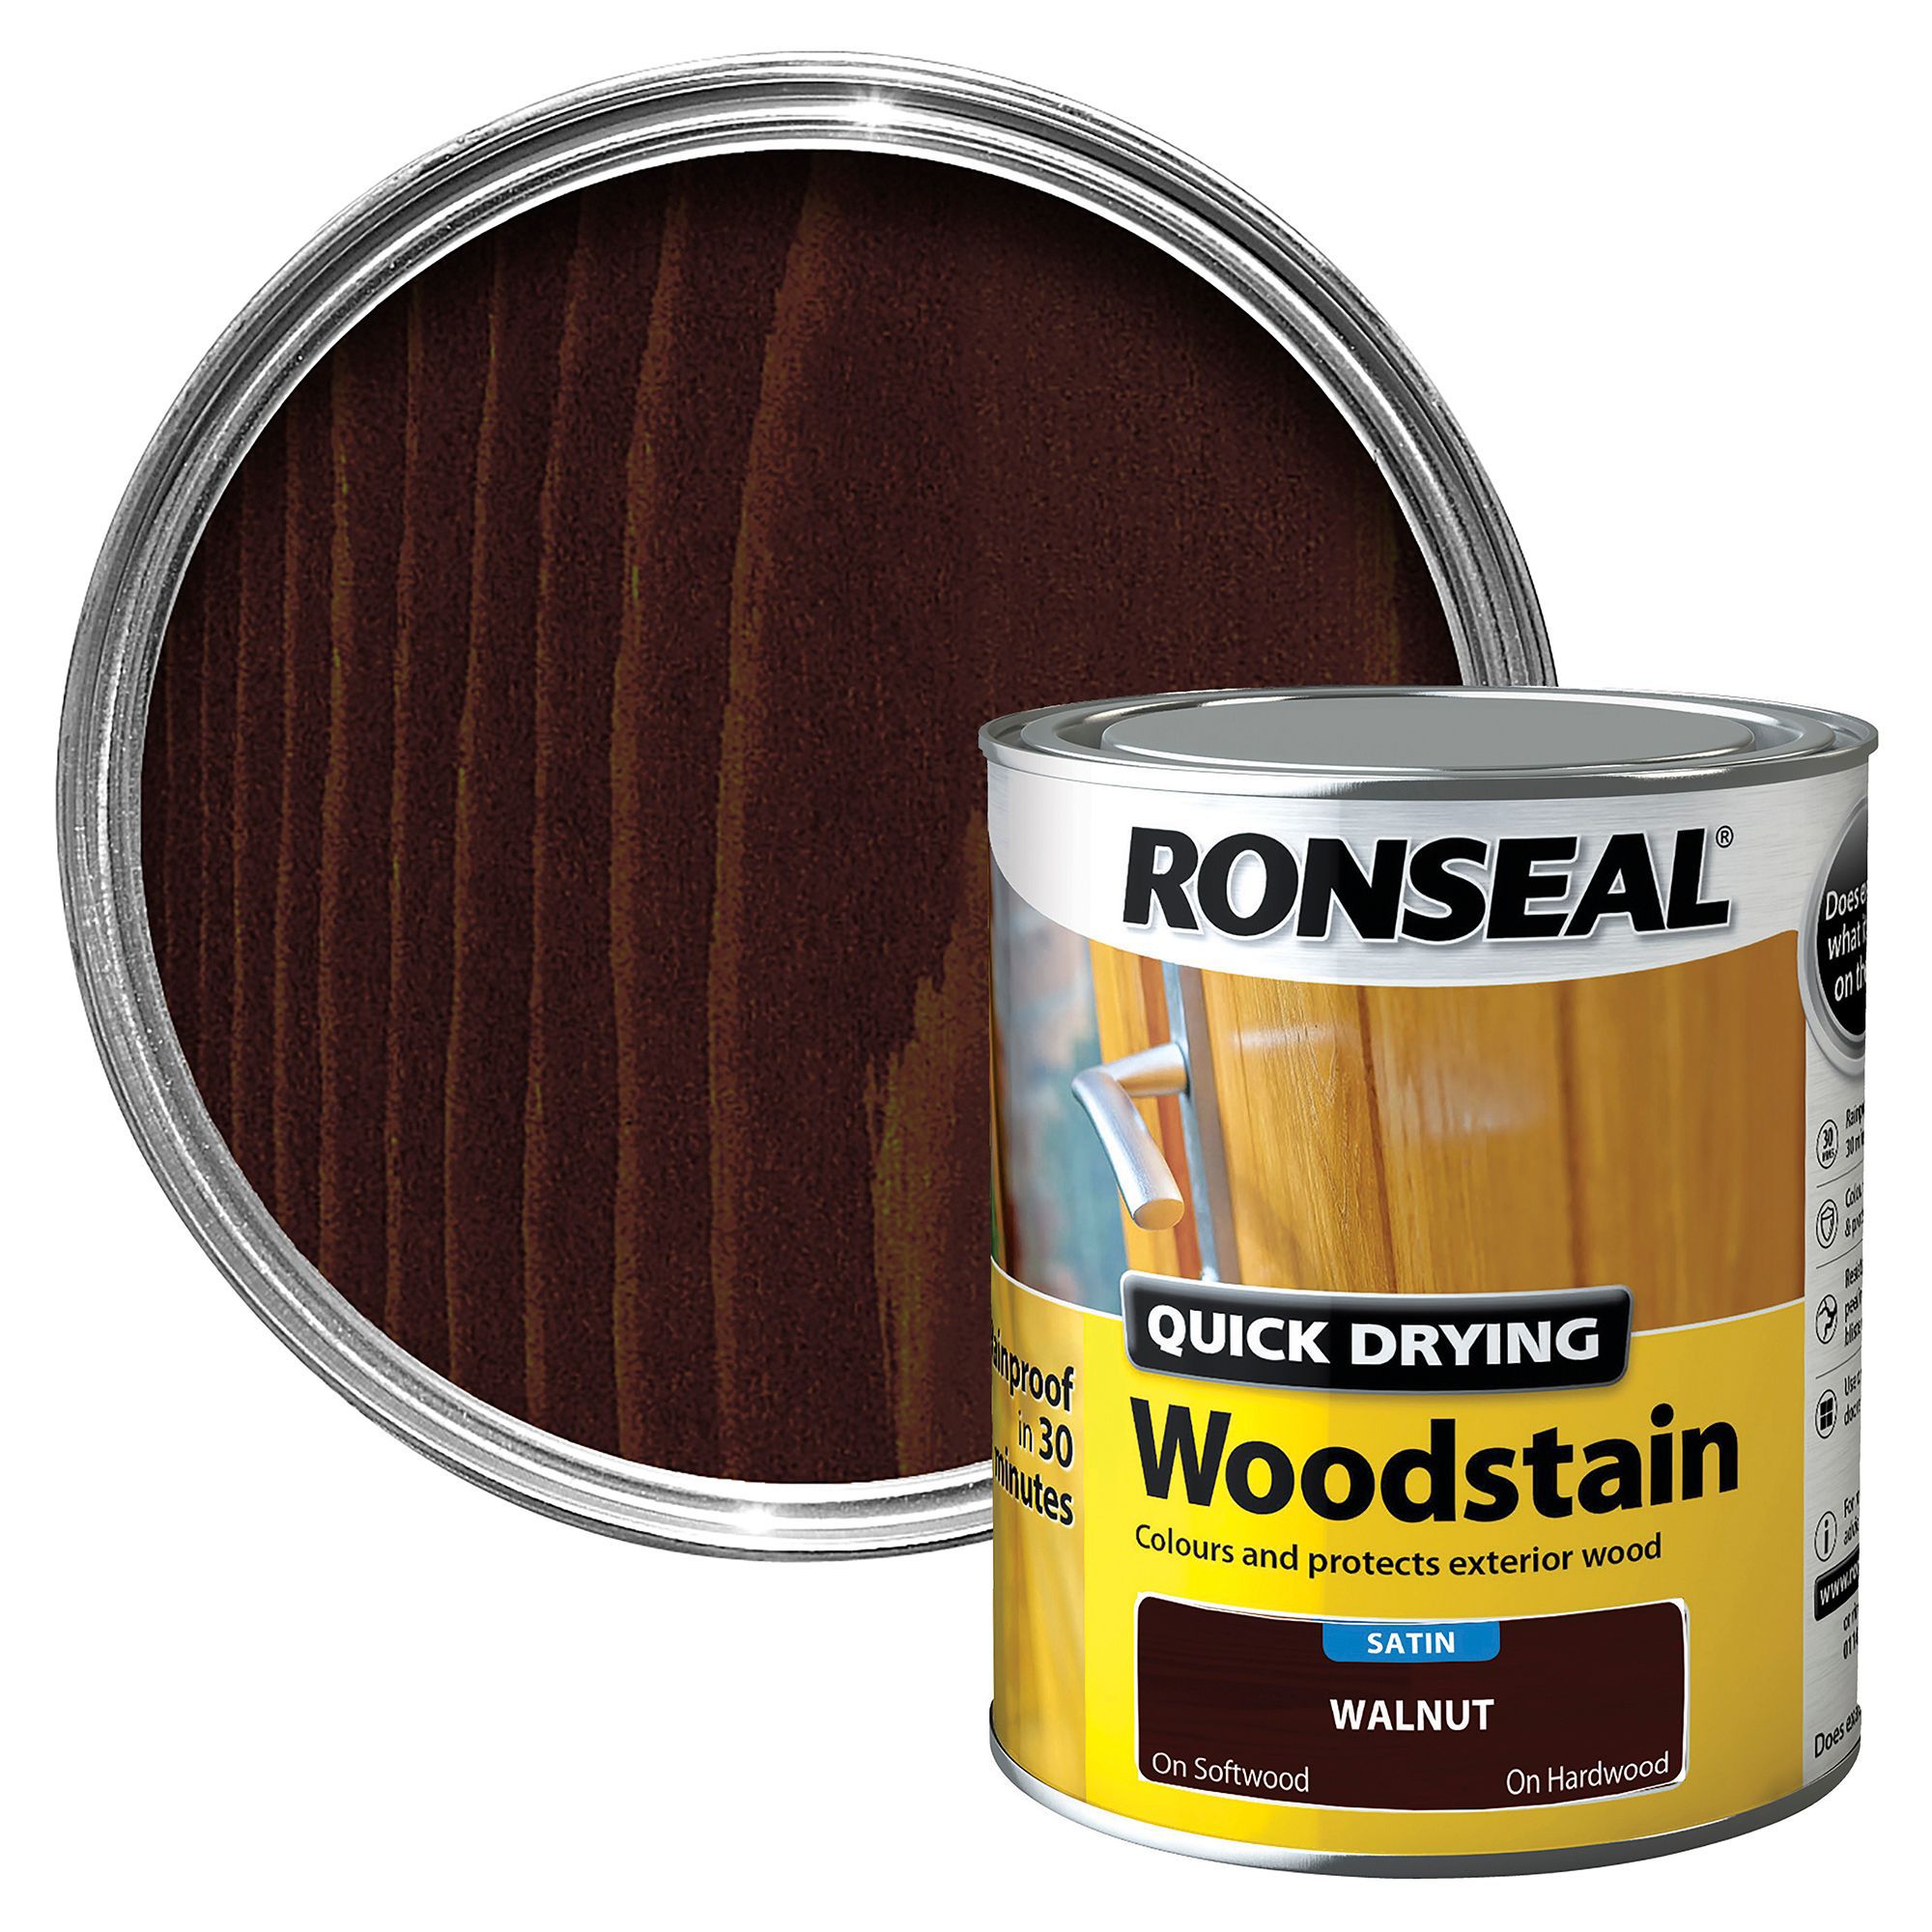 Ronseal Wood stain